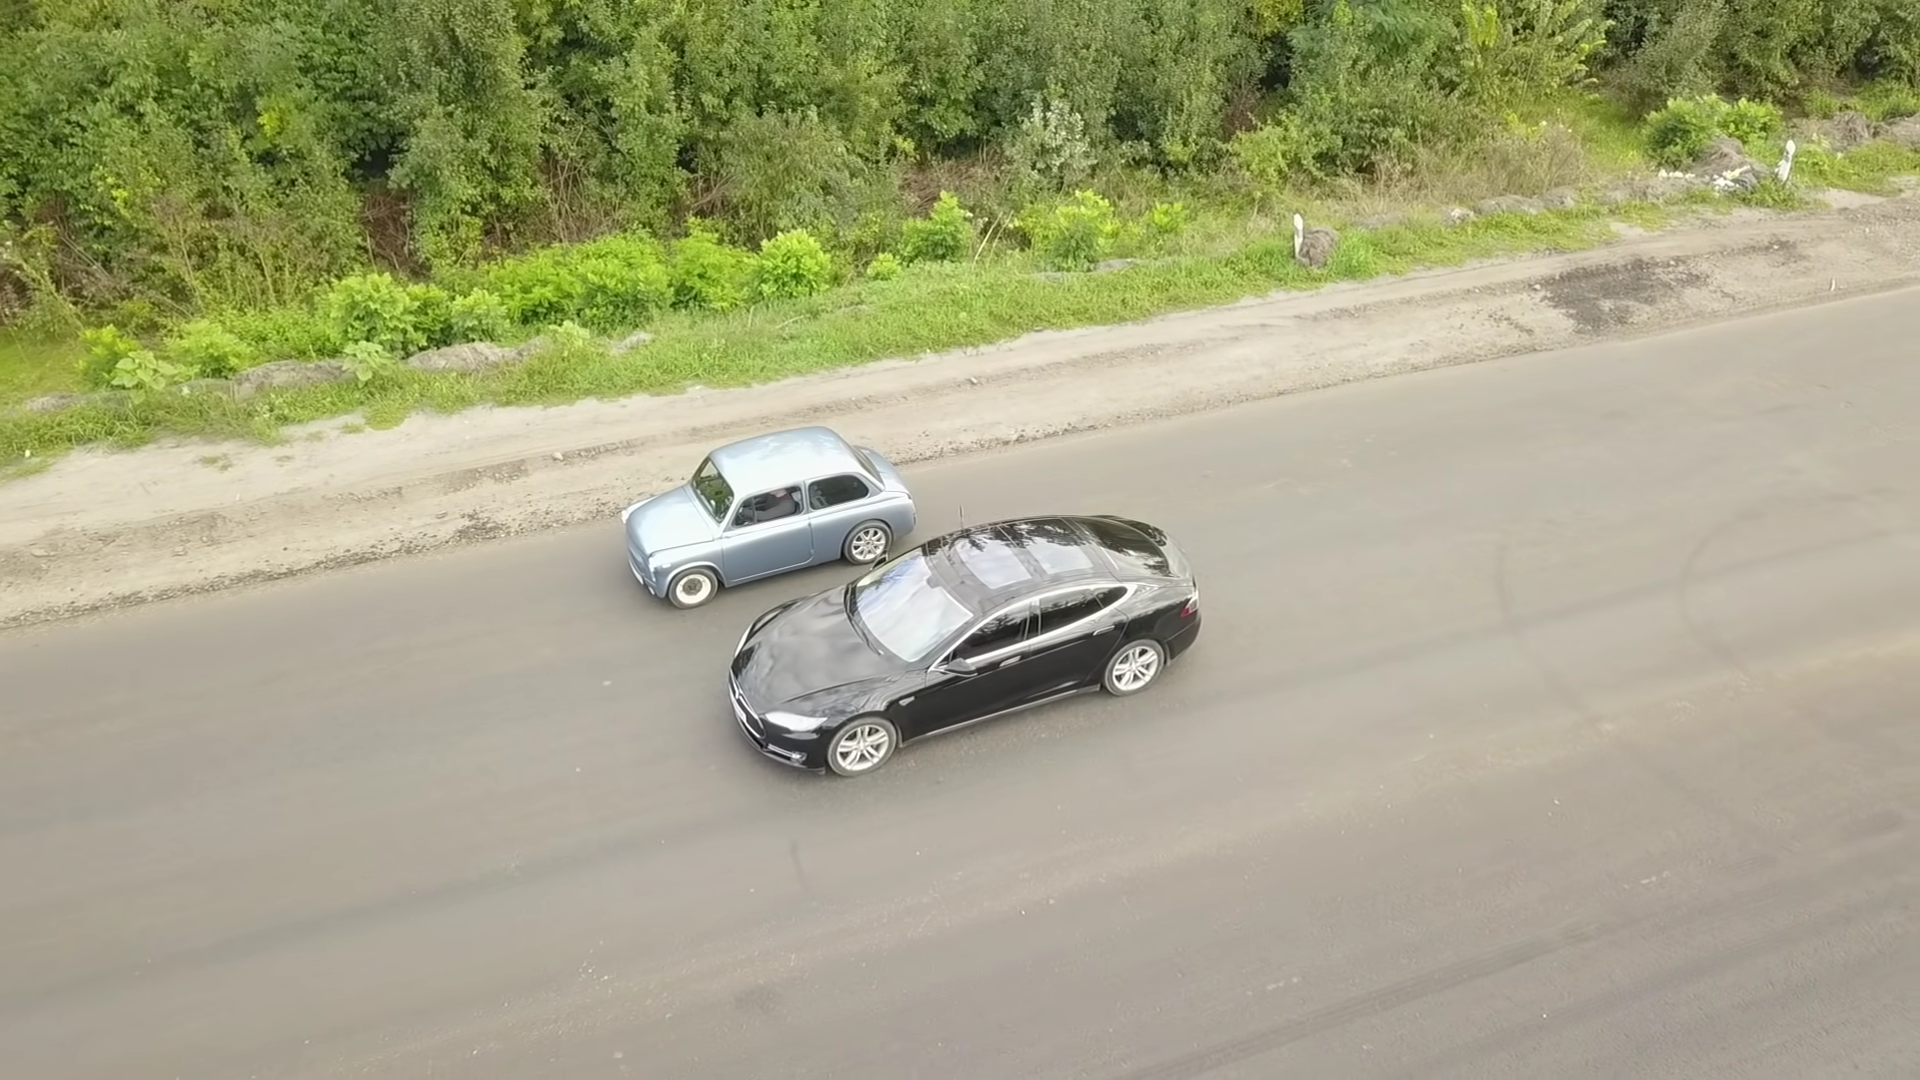 An electric Zaporozhets from Ukraine managed to overtake the Tesla Model S